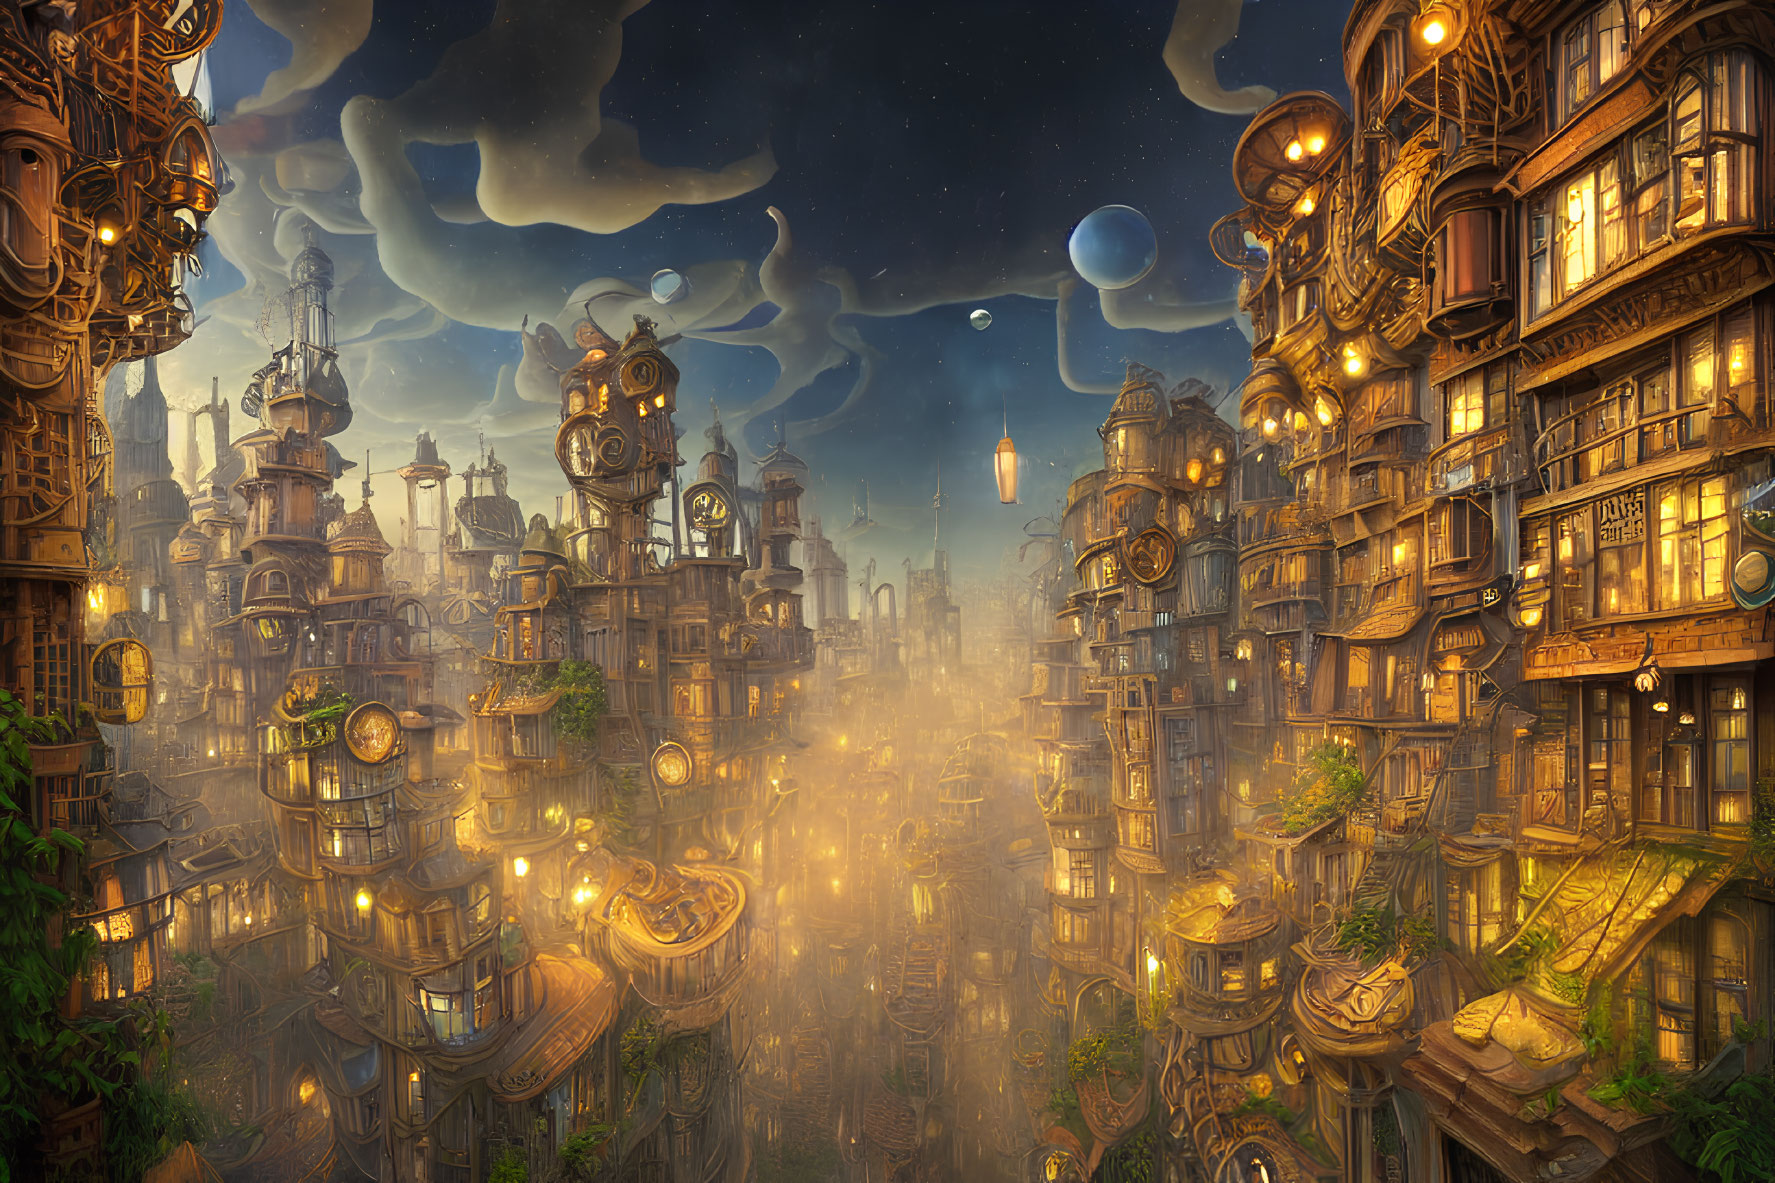 Luminous cityscape at dusk with ornate towers and swirling clouds